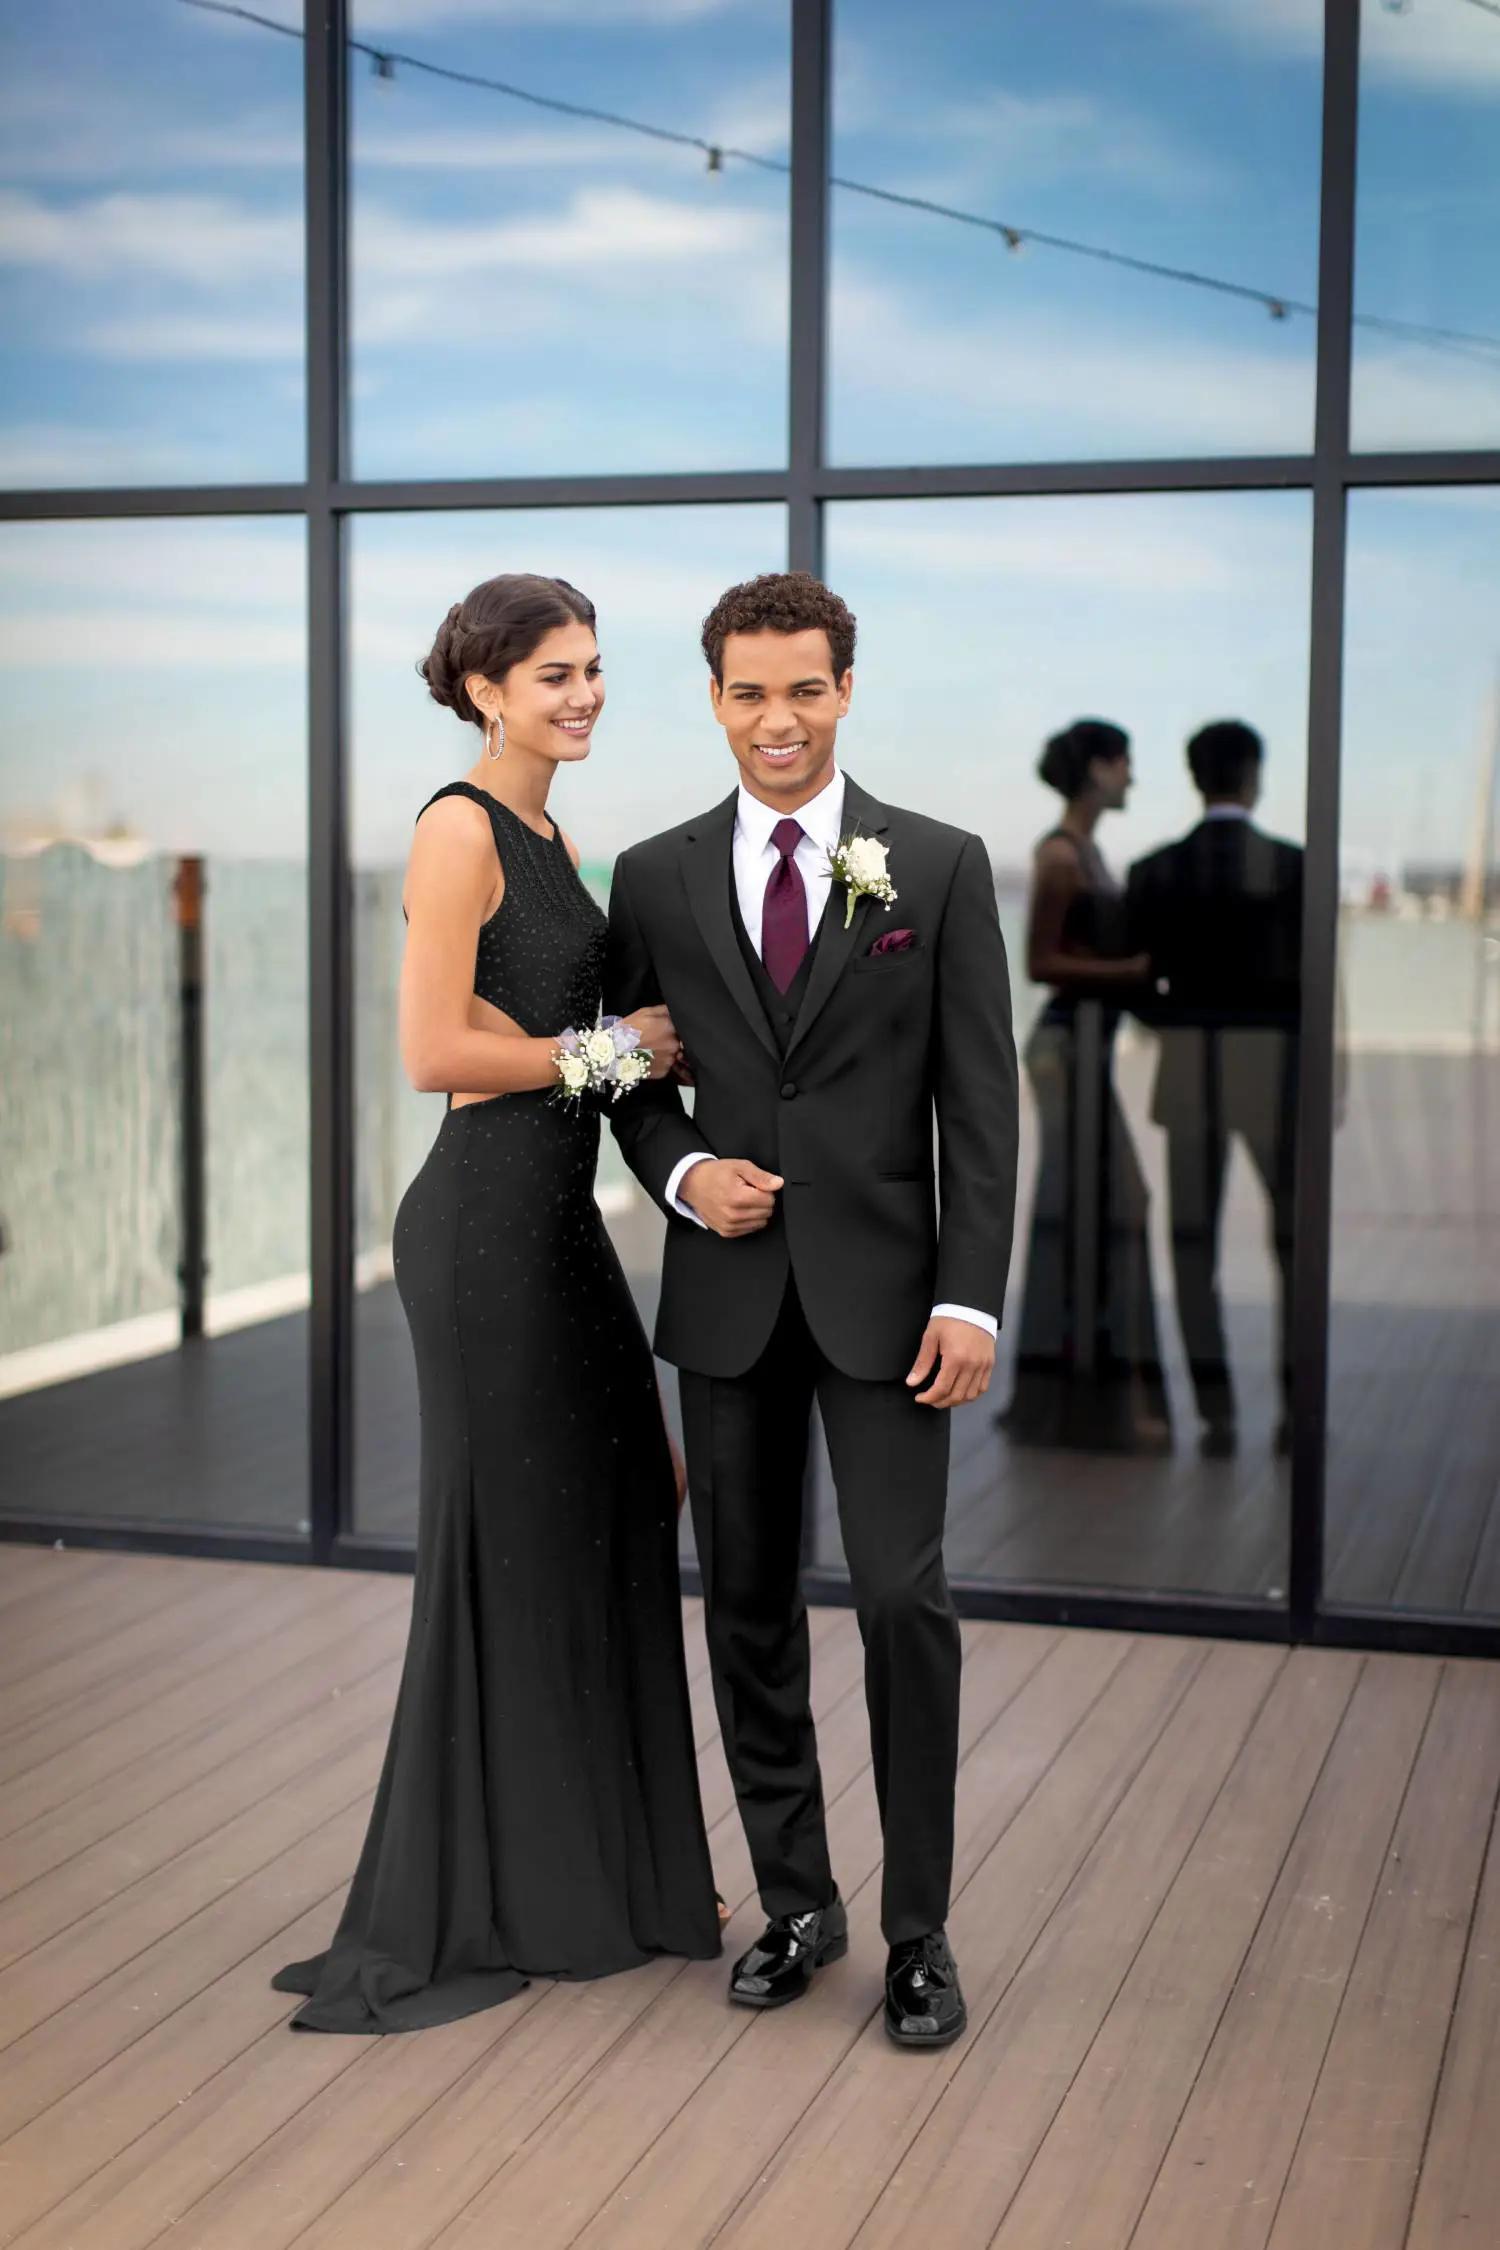 Model wearing black suit standing next to female model wearing a black gown